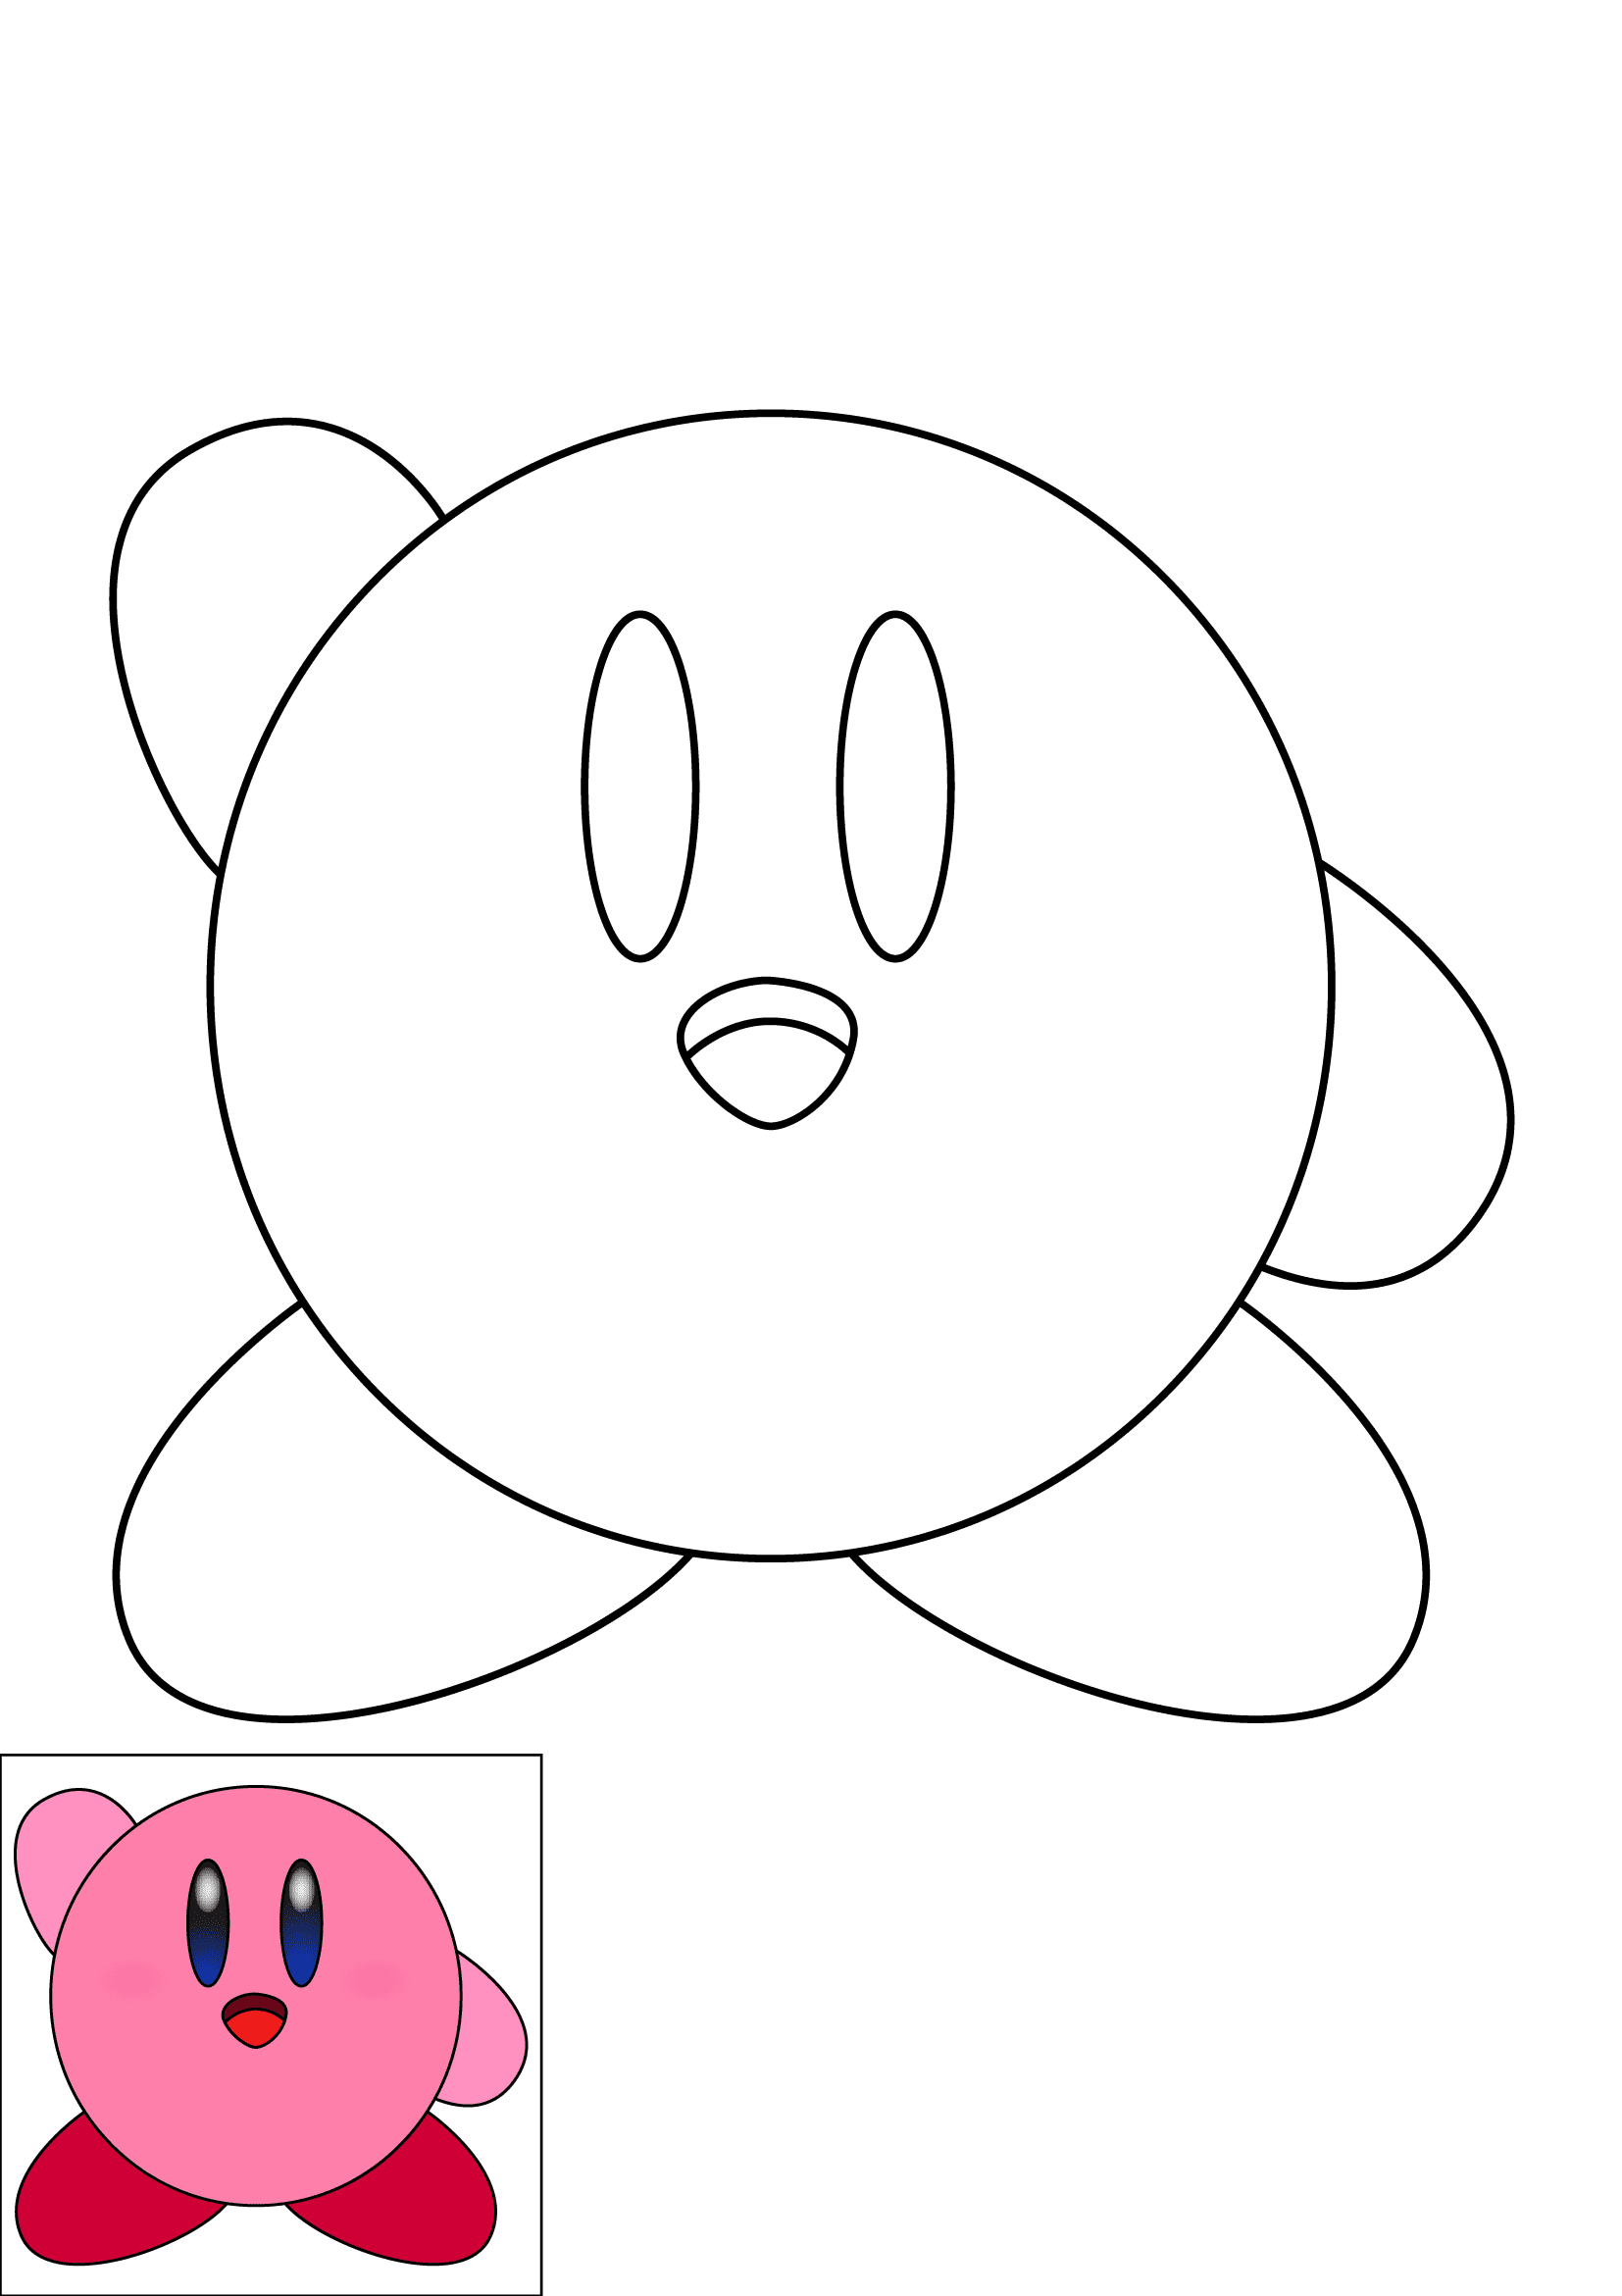 How to Draw Kirby Step by Step Printable Color